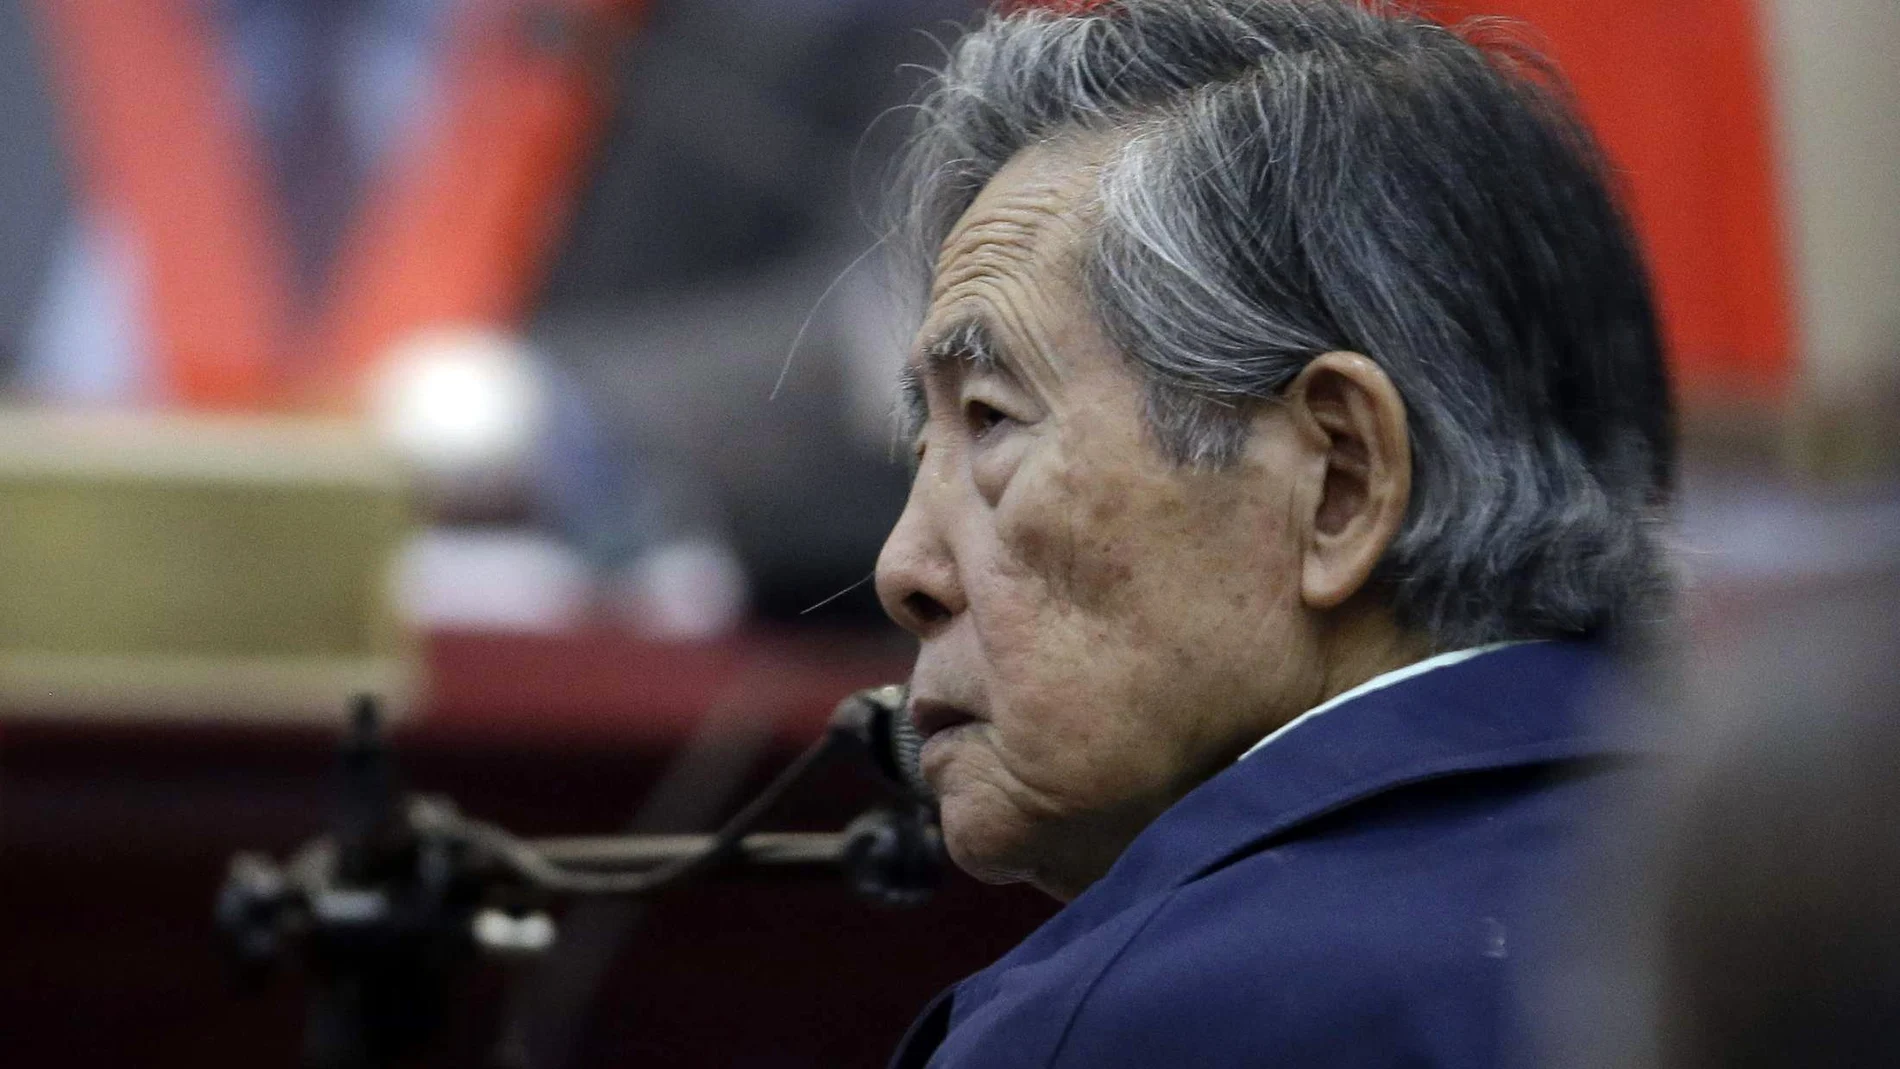 FILE - In this March 15, 2018 file photo, Peru's former President Alberto Fujimori listens to a question during his testimony in a courtroom at a military base in Callao, Peru. The government of Peru said Monday, Oct. 4, 2021, that Fujimori who is serving a 25-year prison sentence for human rights violations and corruption, will be having an invasive cardiac procedure and will admitted to the the ICU of a local clinic. (AP Photo/Martin Mejia, File)